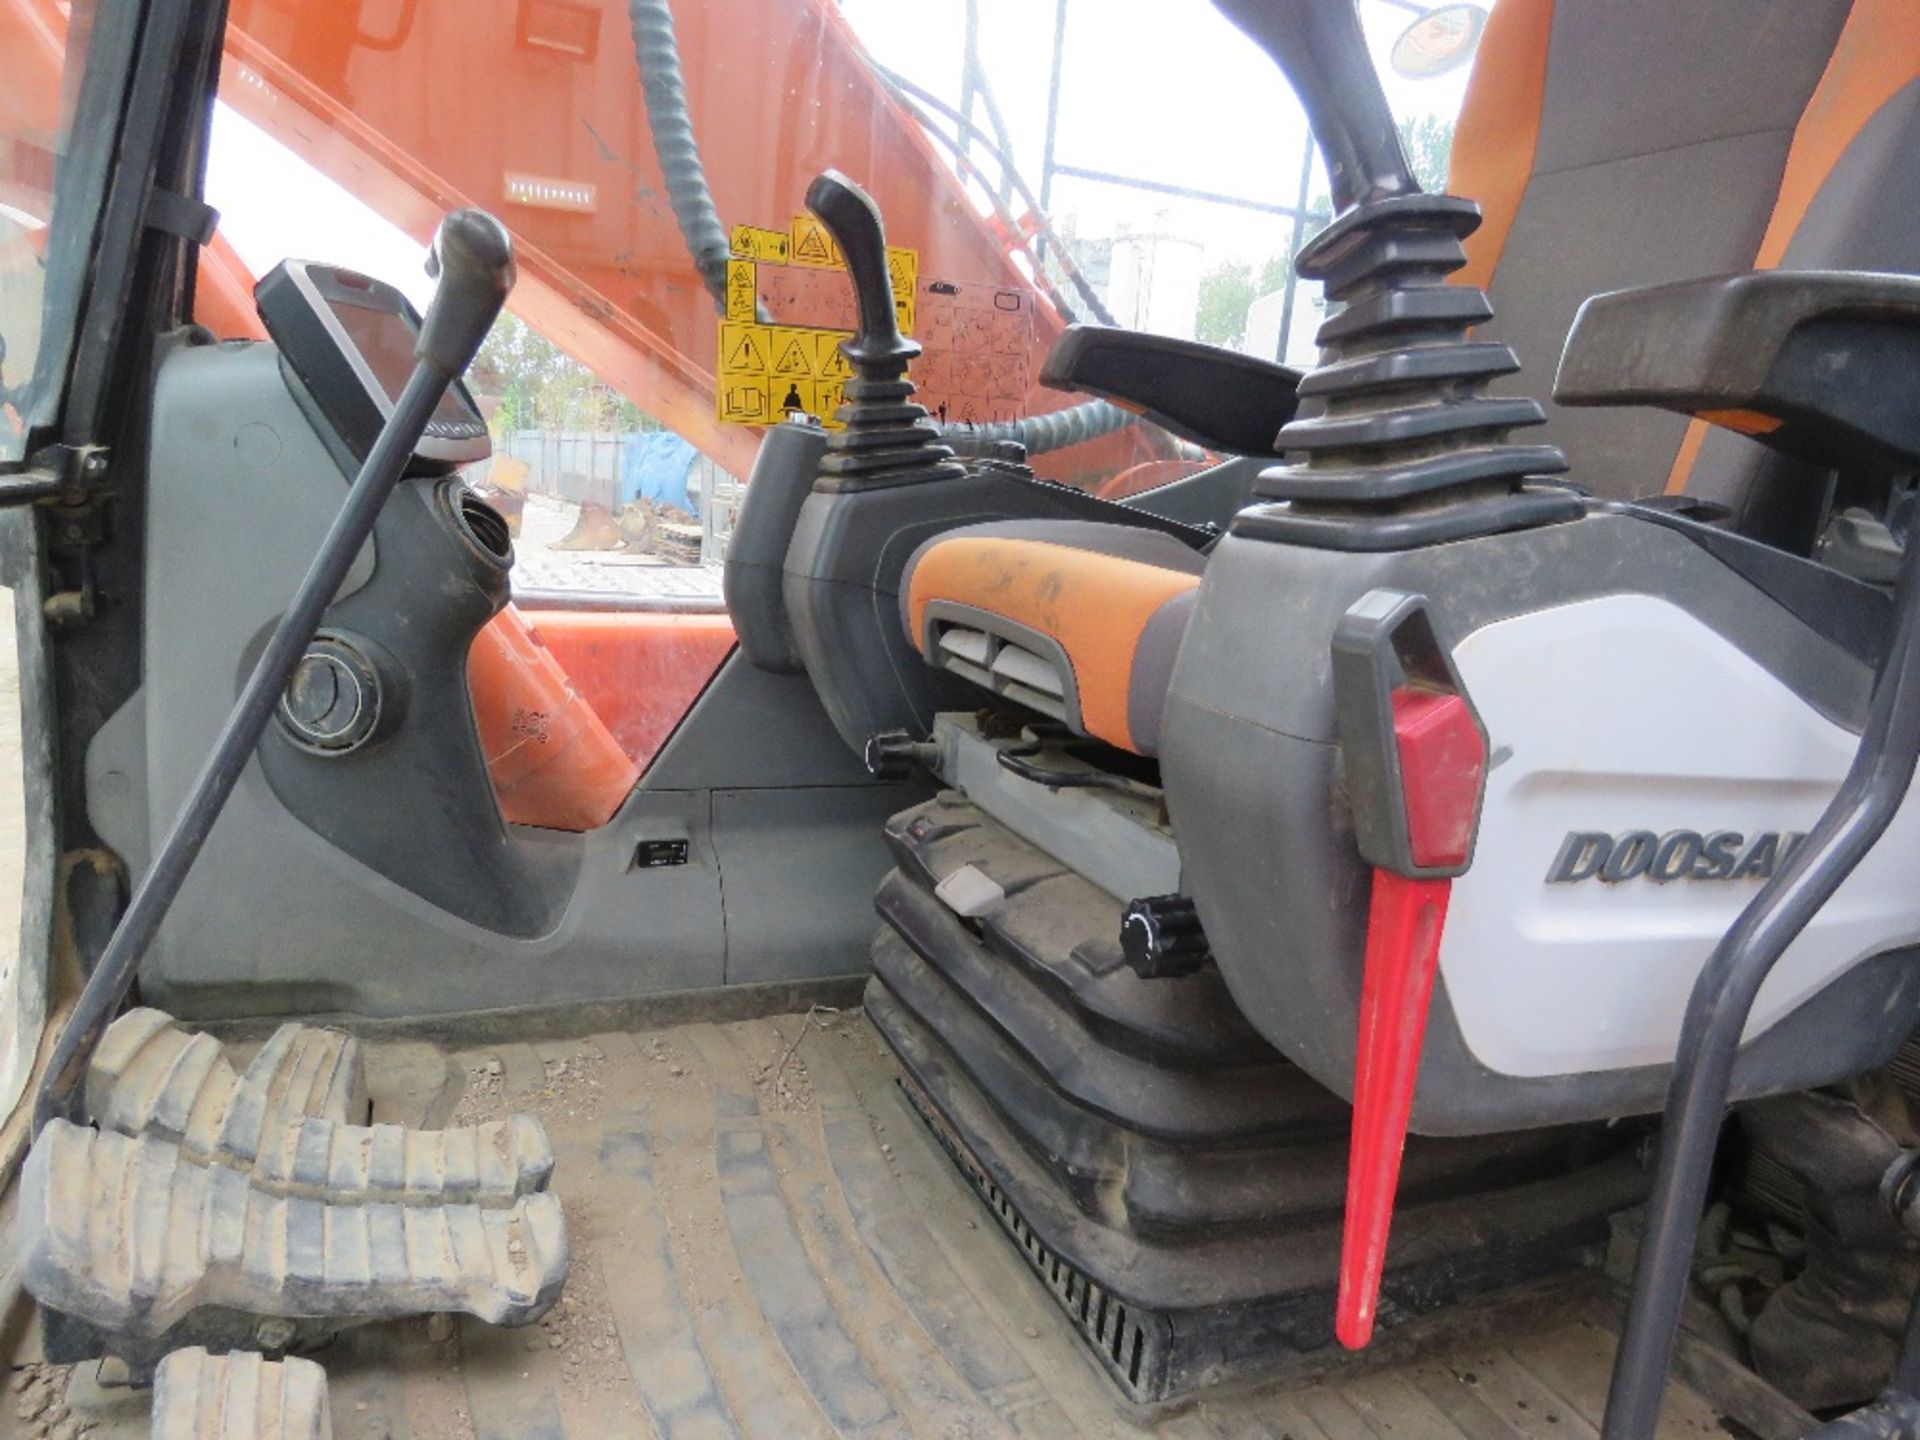 DOOSAN DX225LC-3 STEEL TRACKED EXCAVATOR 2016 BUILD. Non adblue!! only 10% plus vat BP on this lot - Image 9 of 16